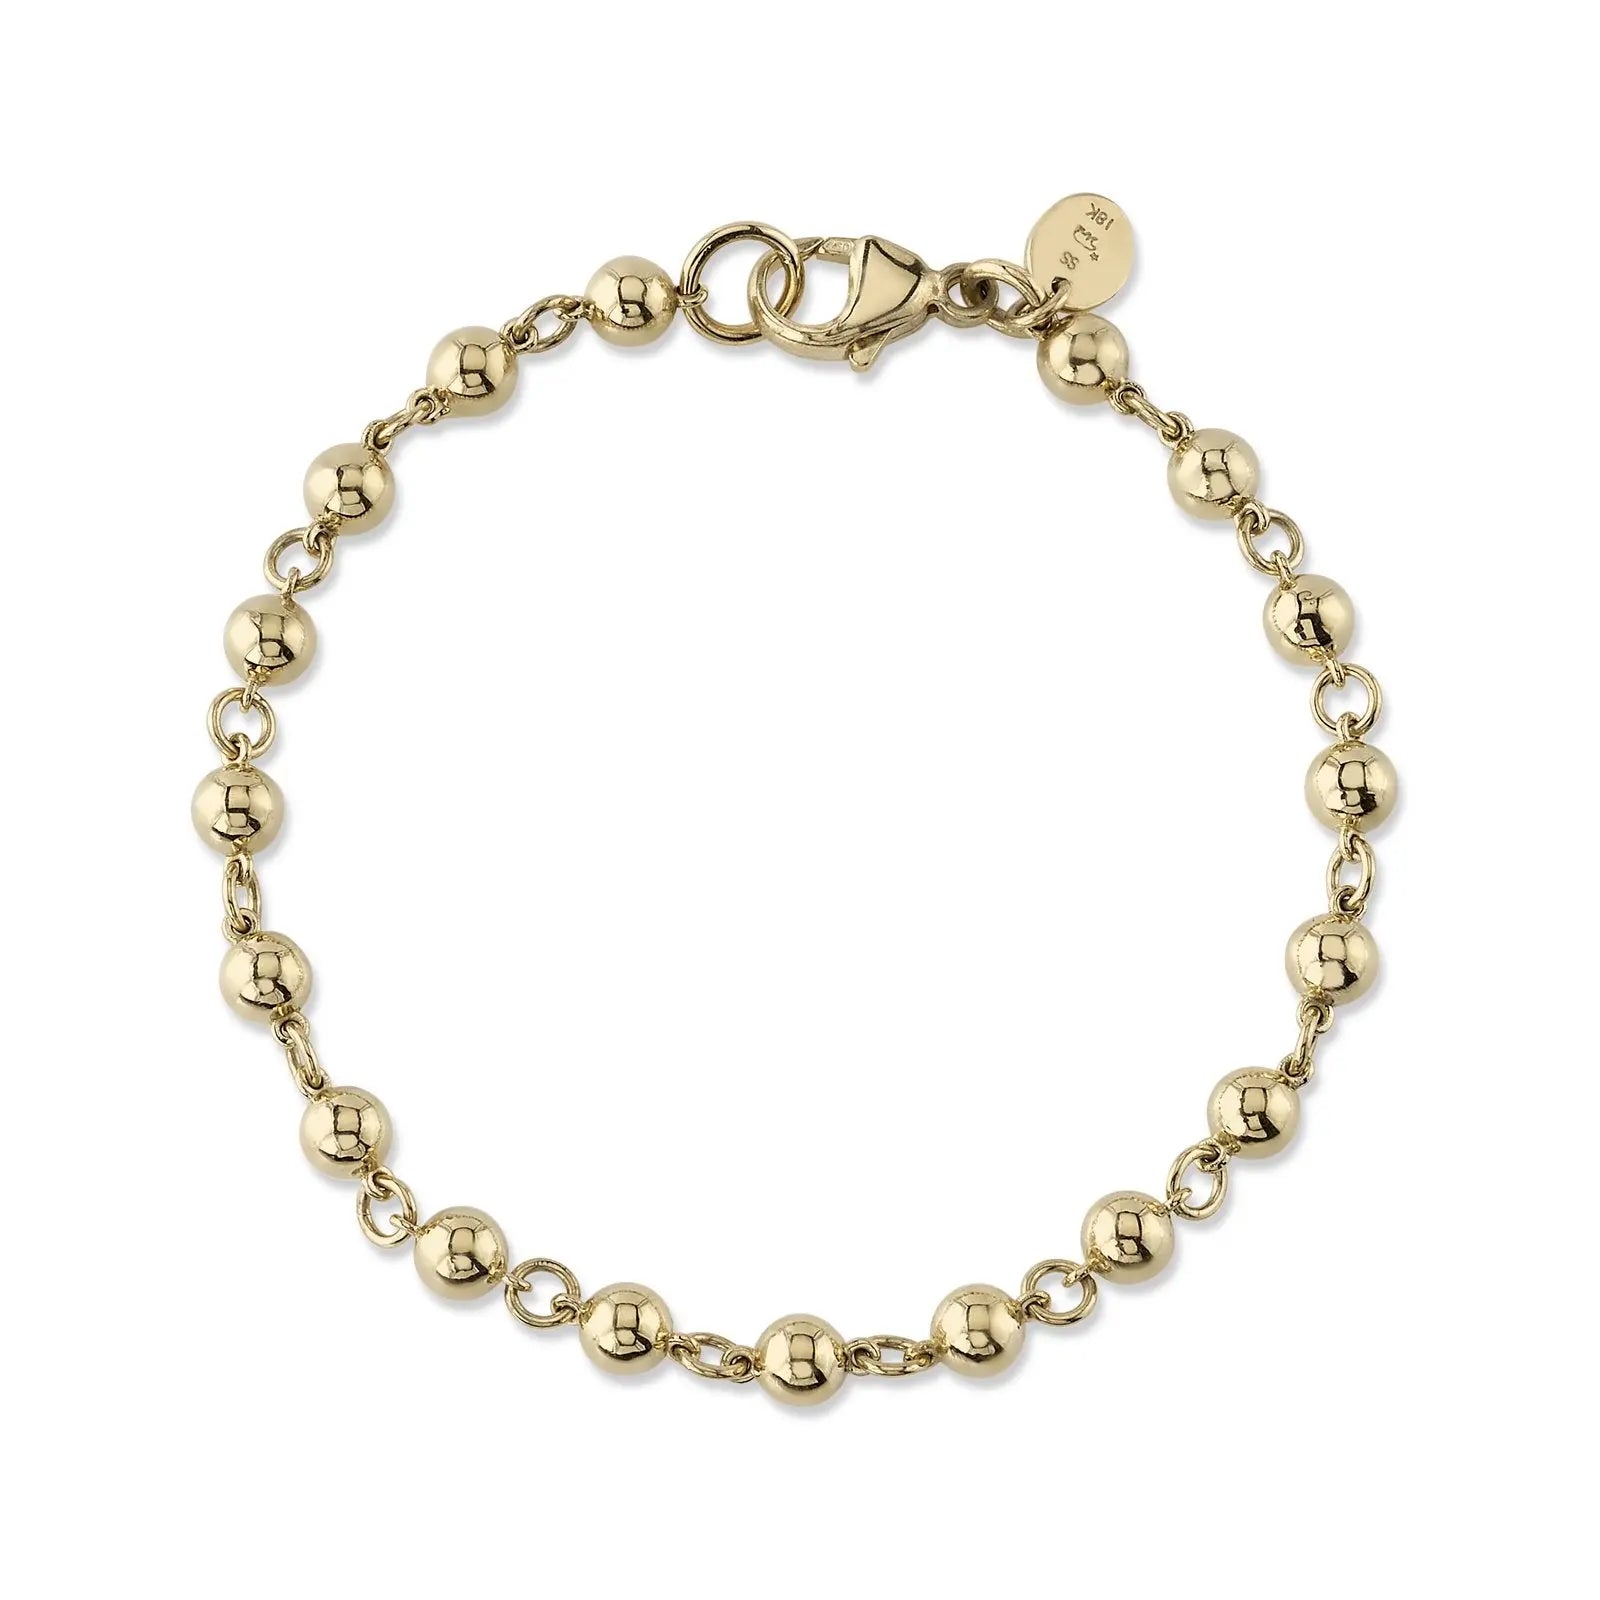 Handcrafted 18K yellow gold large rosary bead bracelet. Beads measure 5mm in diameter.  Bracelet measures 7.5"  If an item is out of stock, please allow 6-8 weeks for delivery.  Designed by Single Stone and made in LA